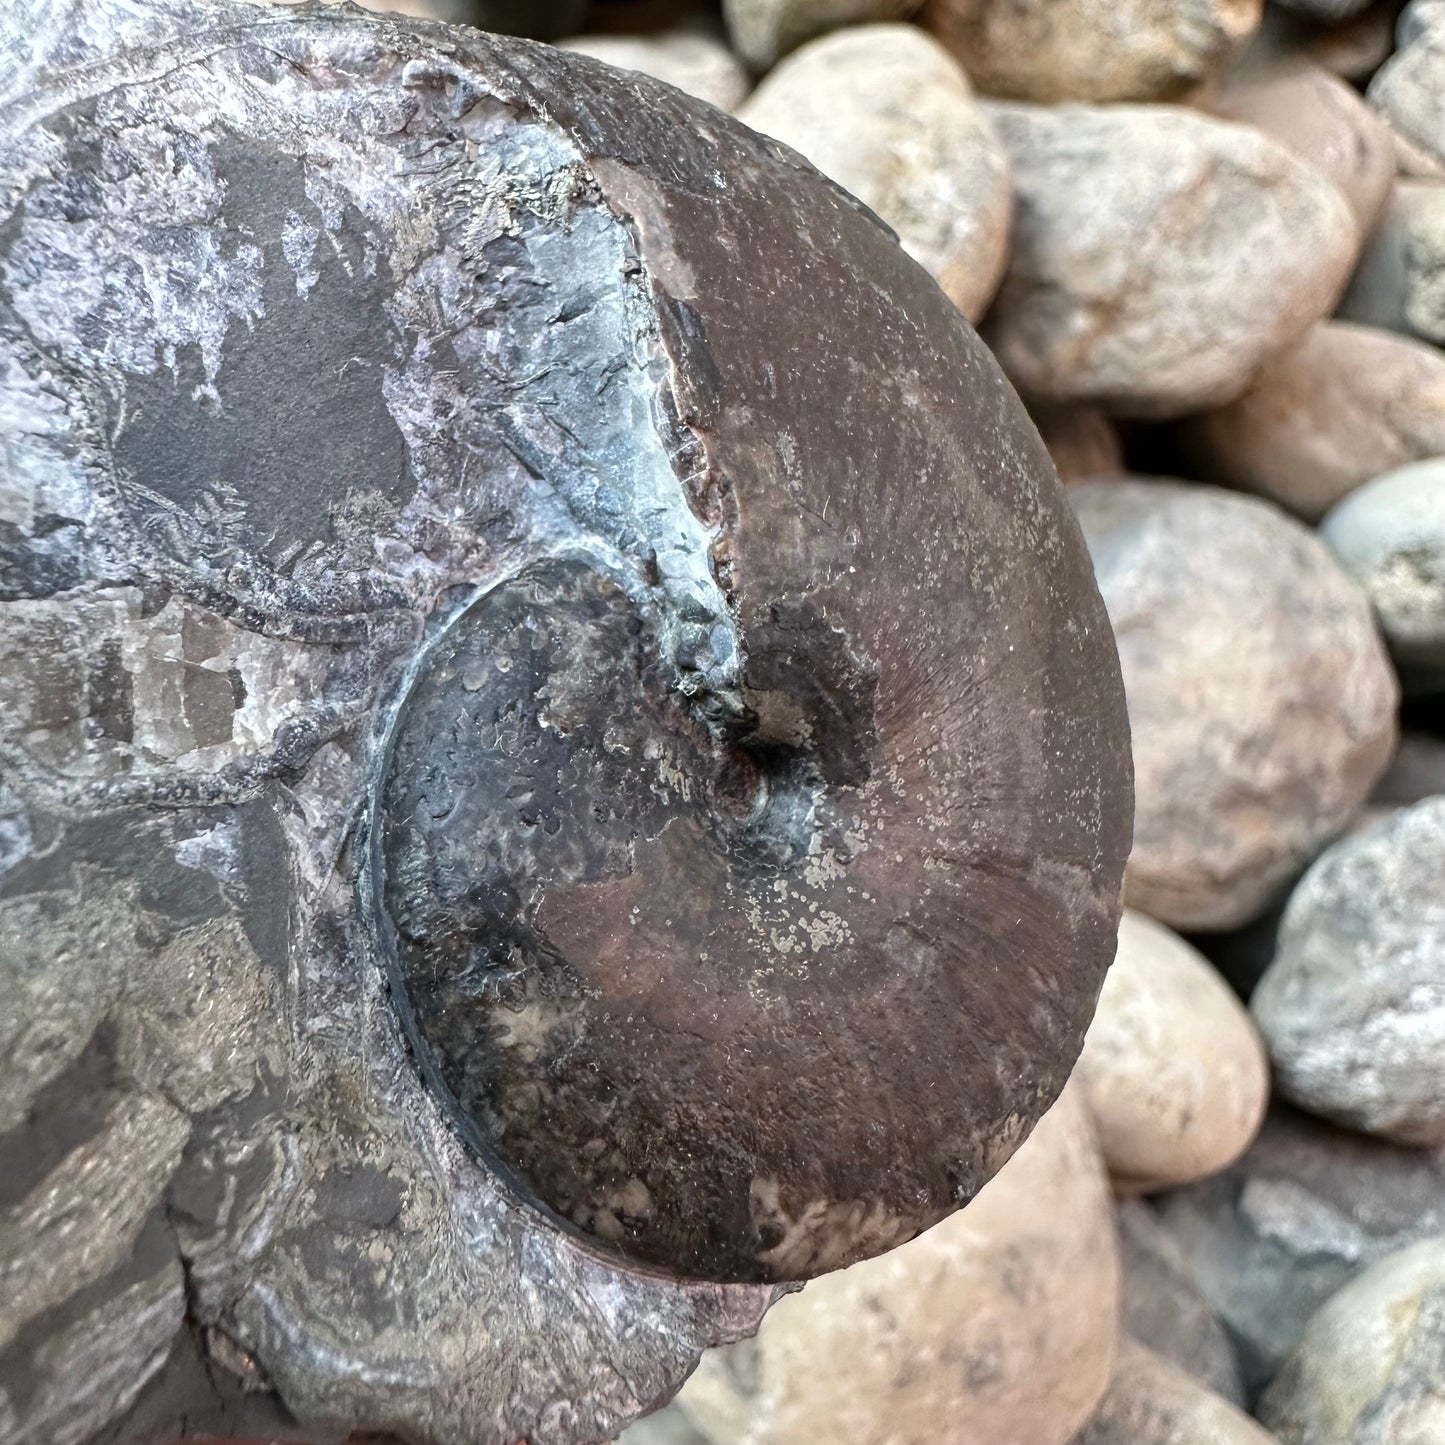 Phylloceras ammonite fossil - Whitby, North Yorkshire Jurassic Coast, Yorkshire fossils